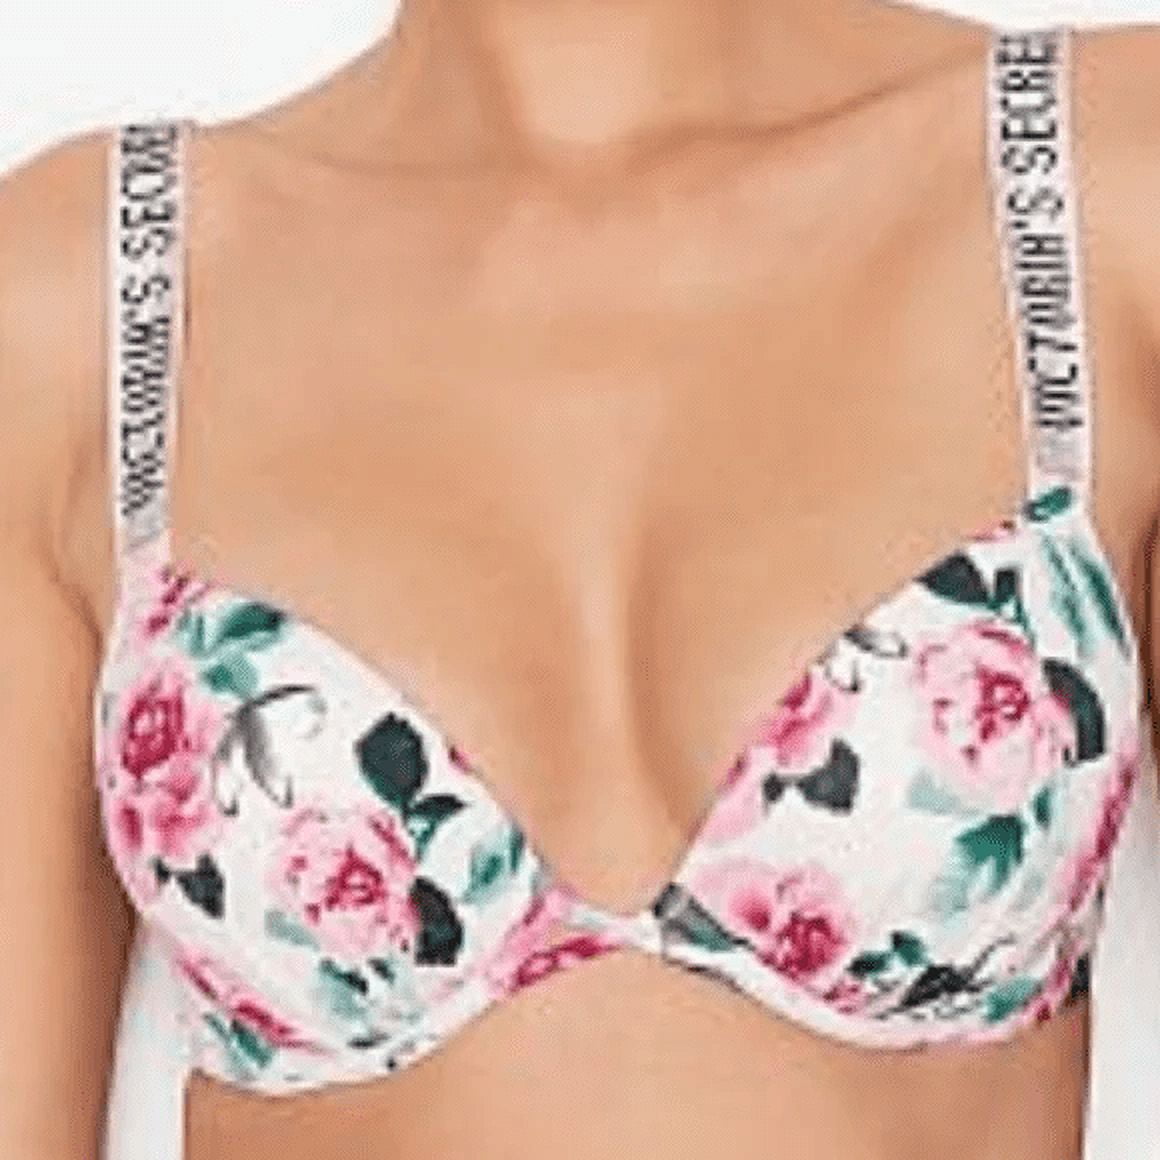 Victoria's Secret Bombshell bikini swimsuits 36B Size undefined - $81 -  From Shoptillyoudrop